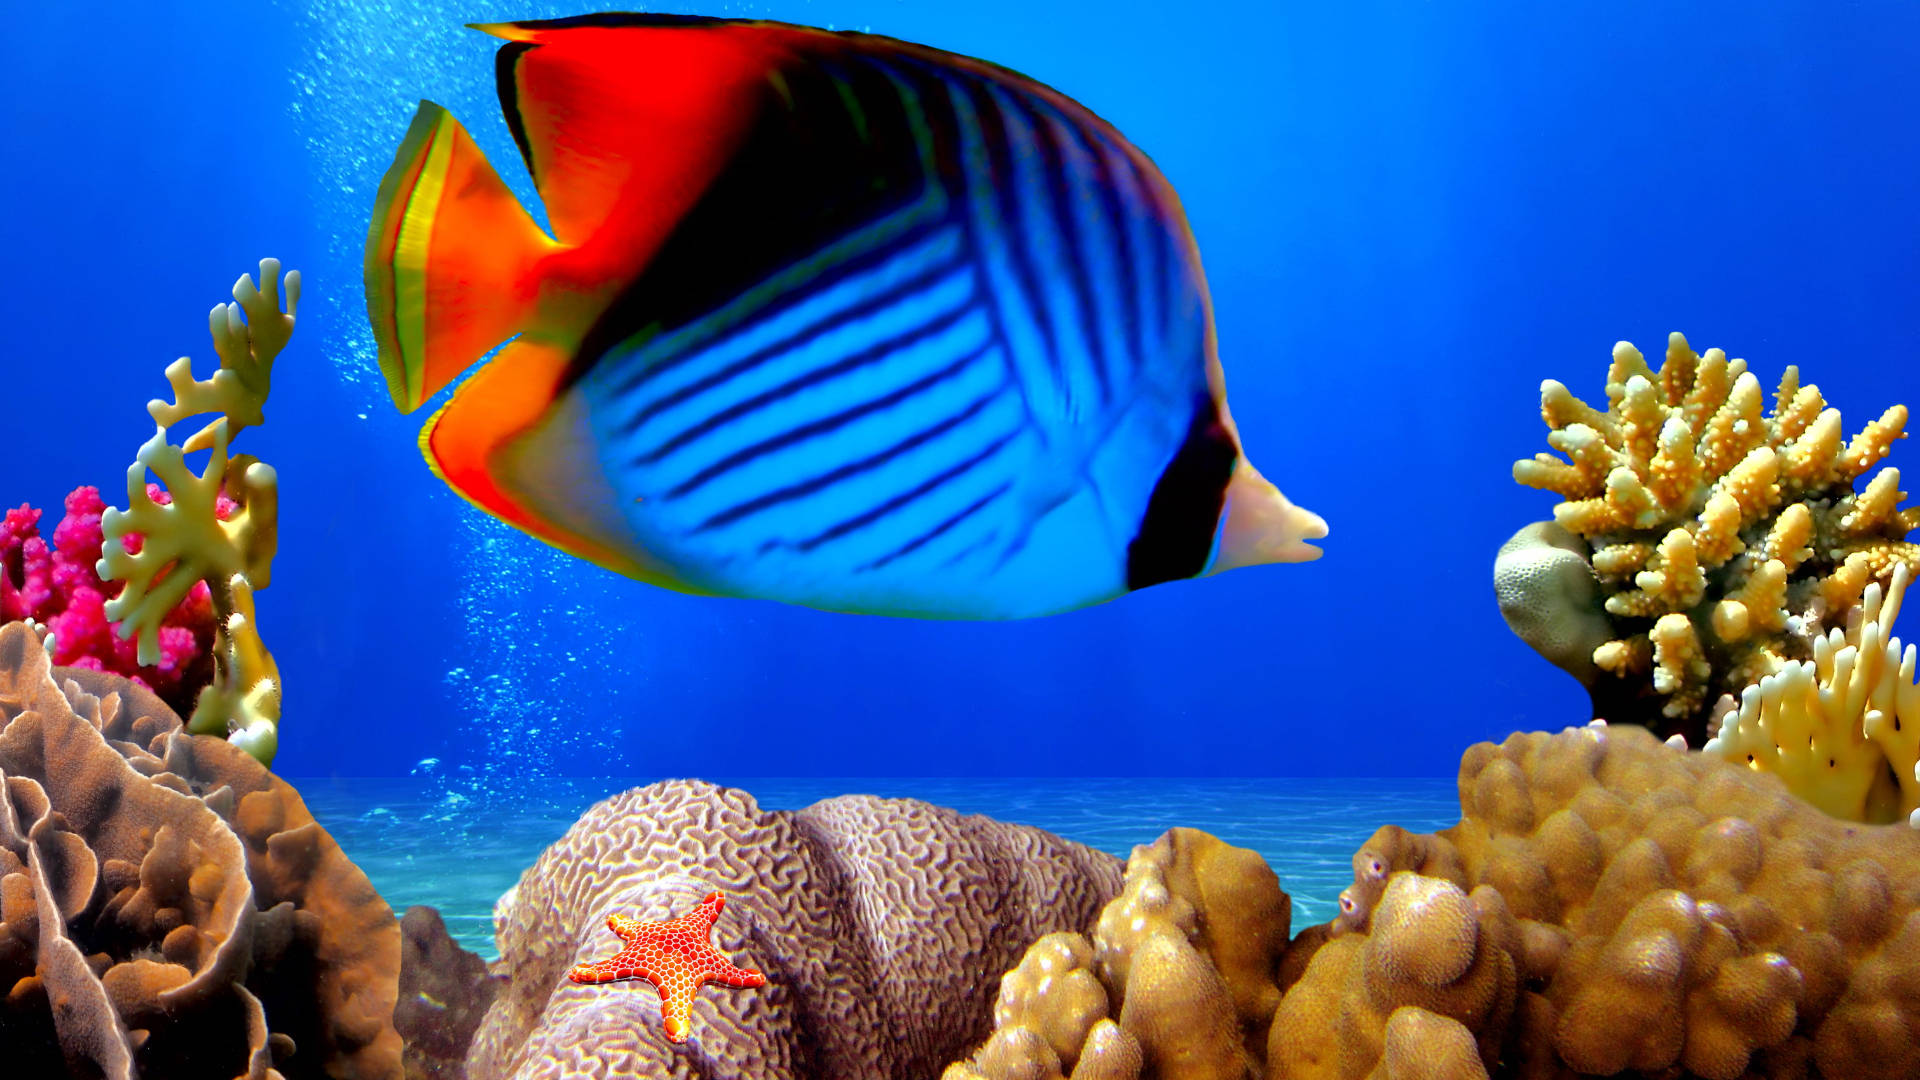 HD Betta Fish Wallpapers - Apps on Google Play